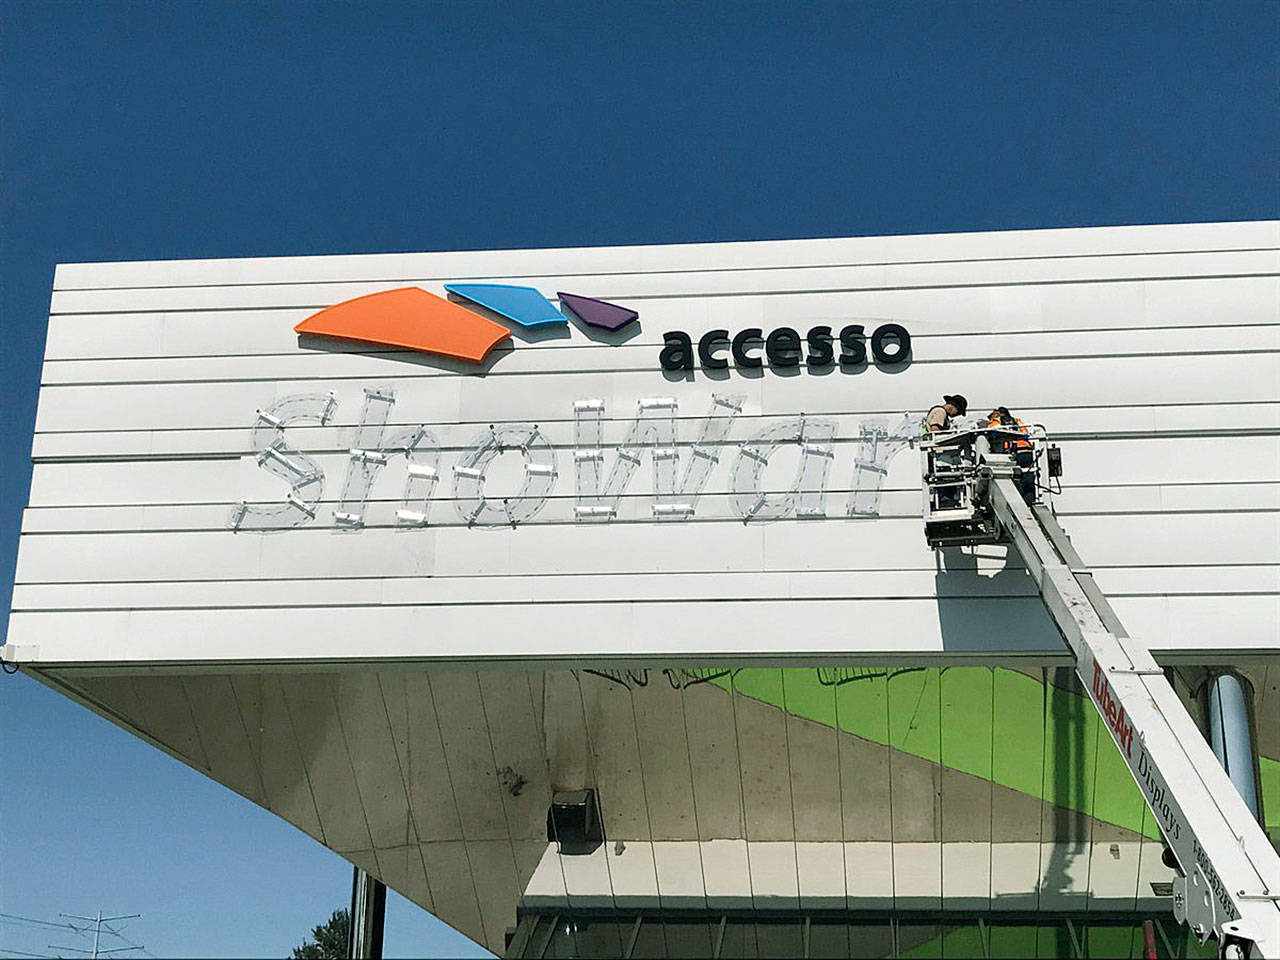 Crews place the new accesso ShoWare Center name last week on the city-owned arena. COURTESY PHOTO, accesso ShoWare Center